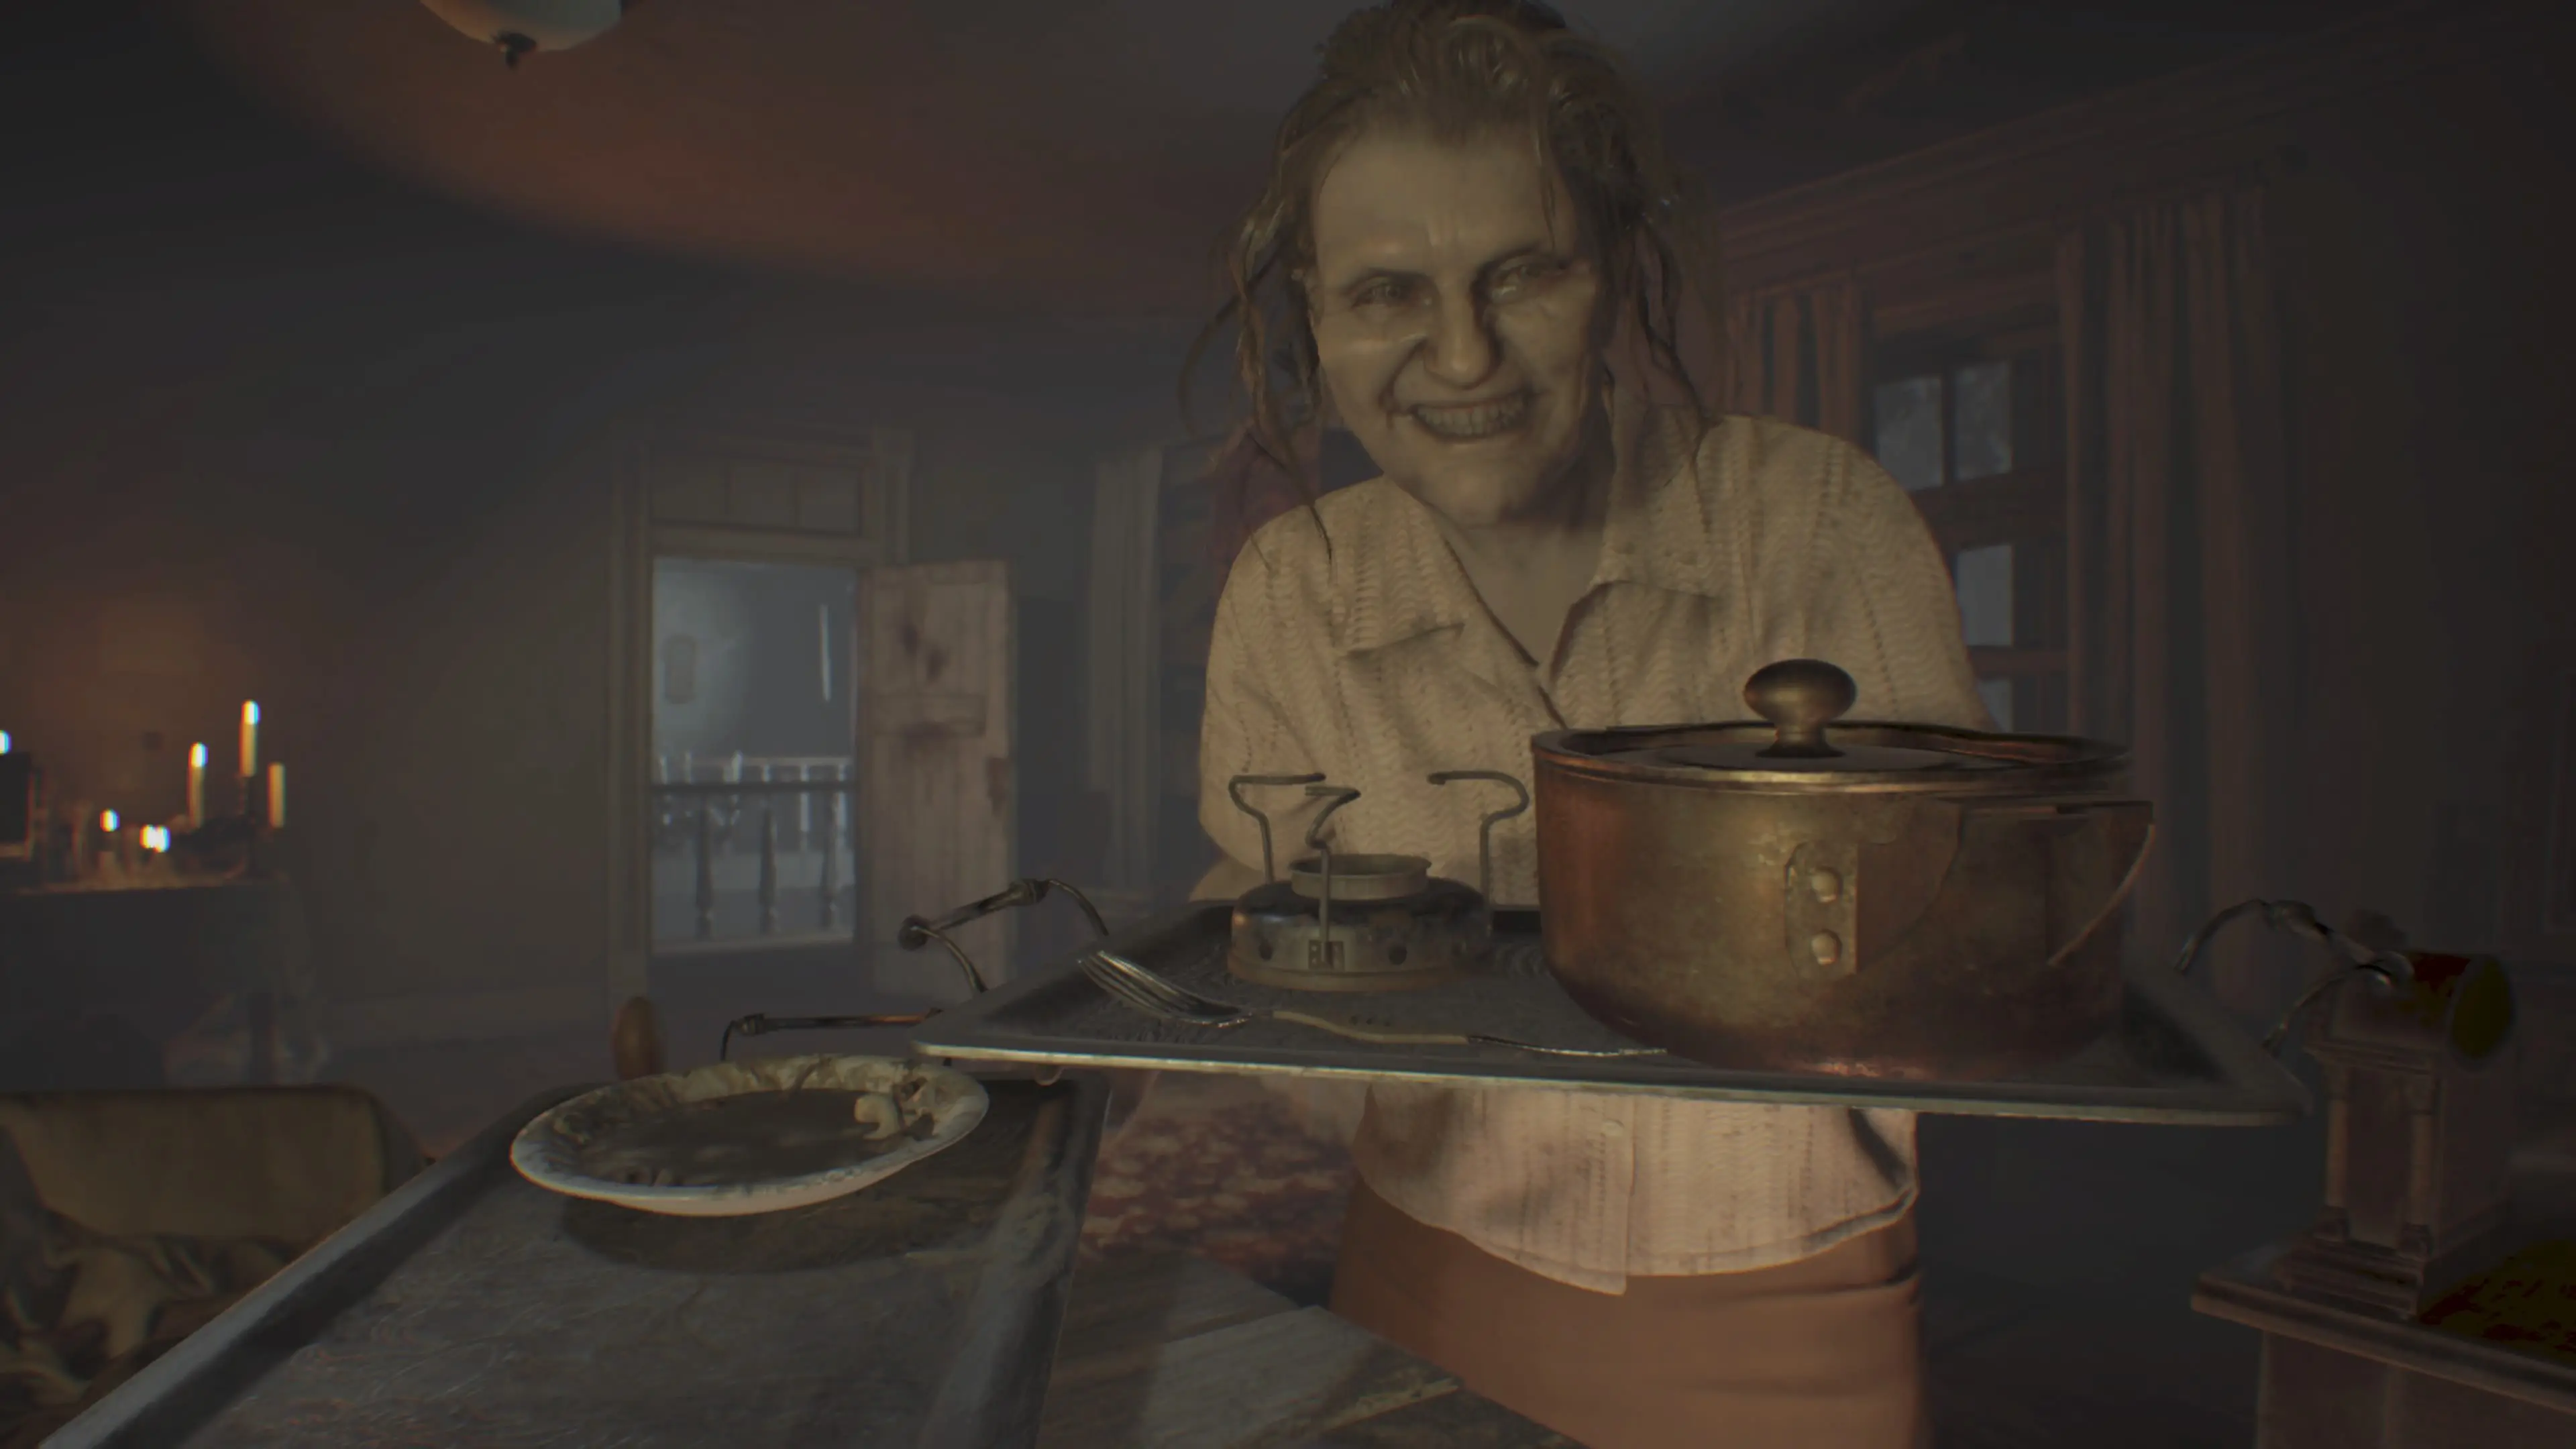 Resident Evil VII: Banned Footage Vol. 1 & Vol. 2 review - a mixed bag of DLC